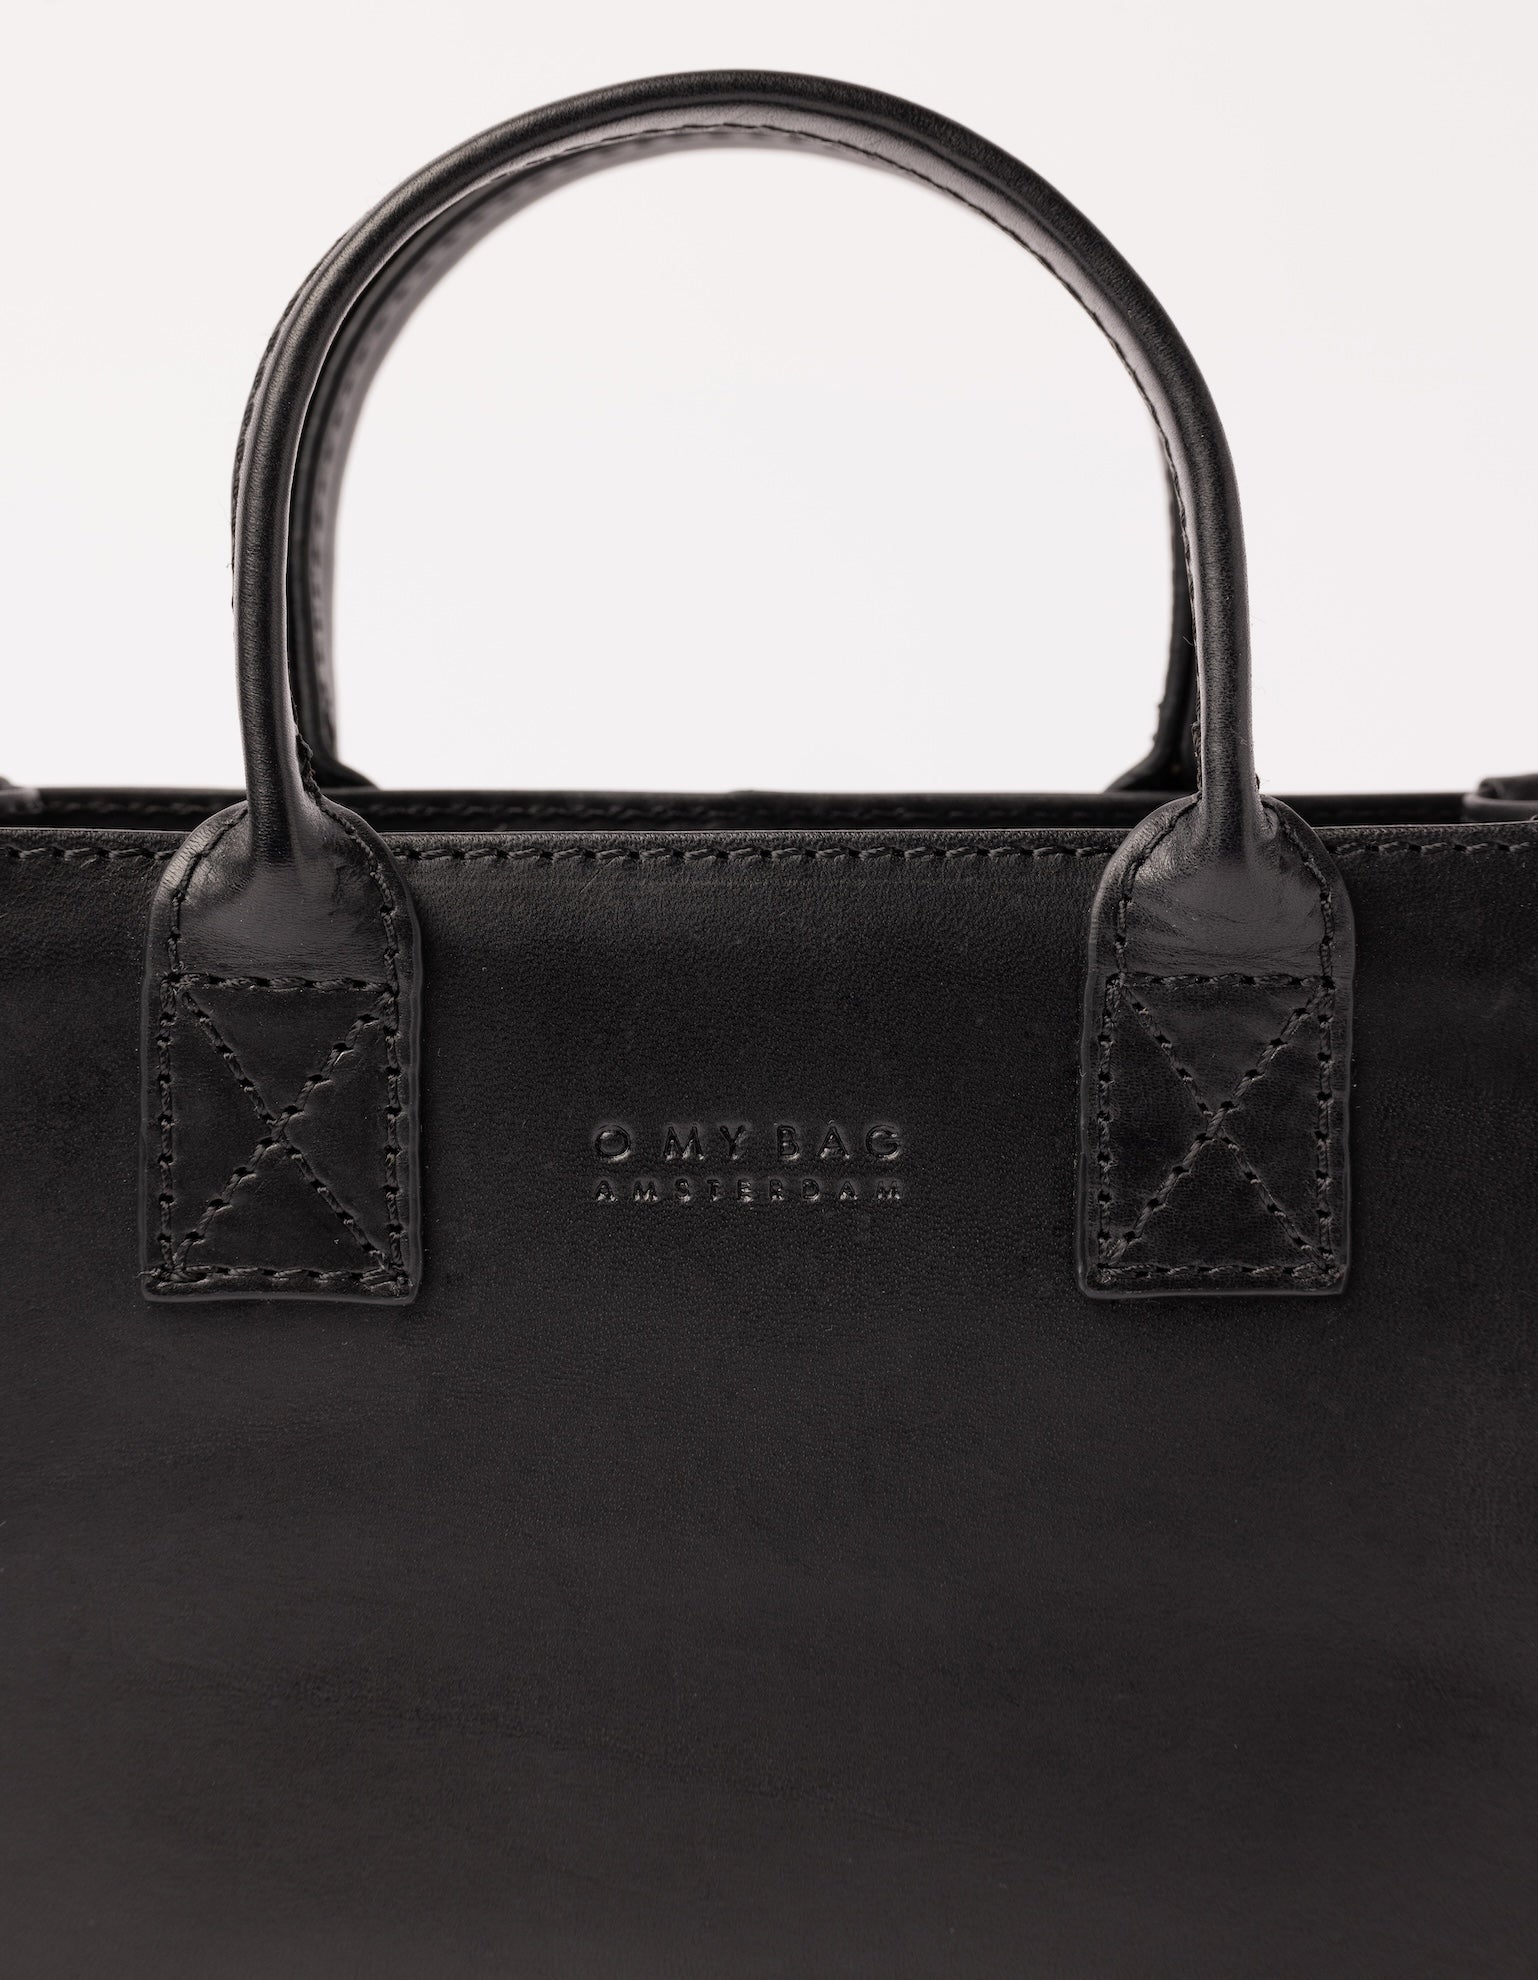 Rectangle shaped mini leather bag - close-up of handle and logo details.